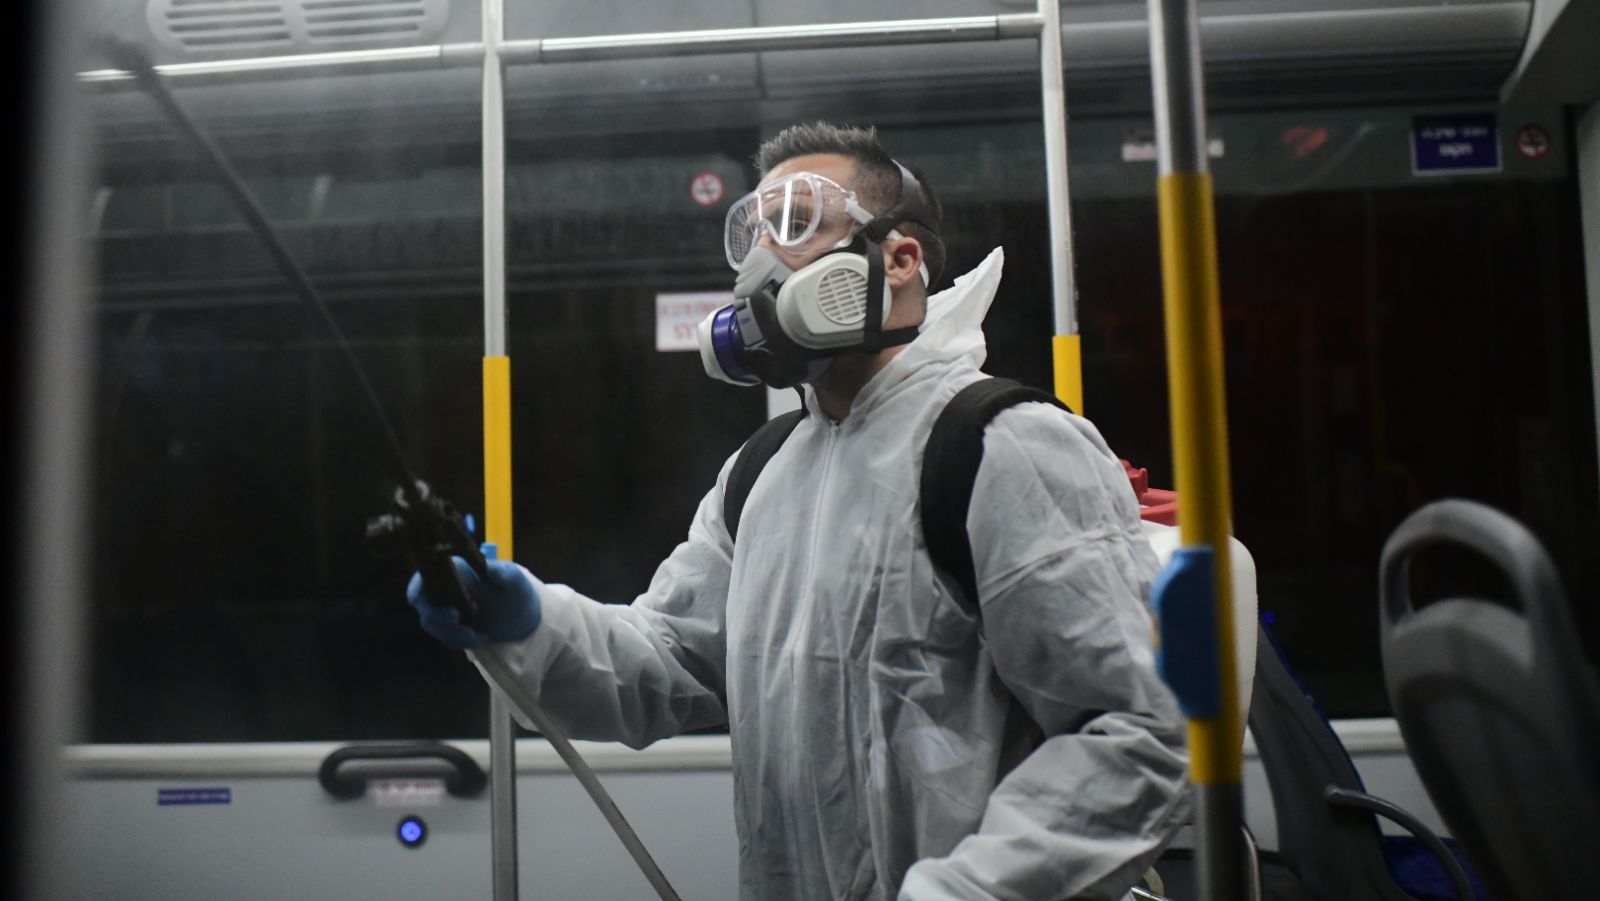 A worker disinfects a bus as a preventive measure amid fears over the spread of the coronavirus in Tel Aviv on March 9, 2020. Photo by Tomer Neuberg/Flash90